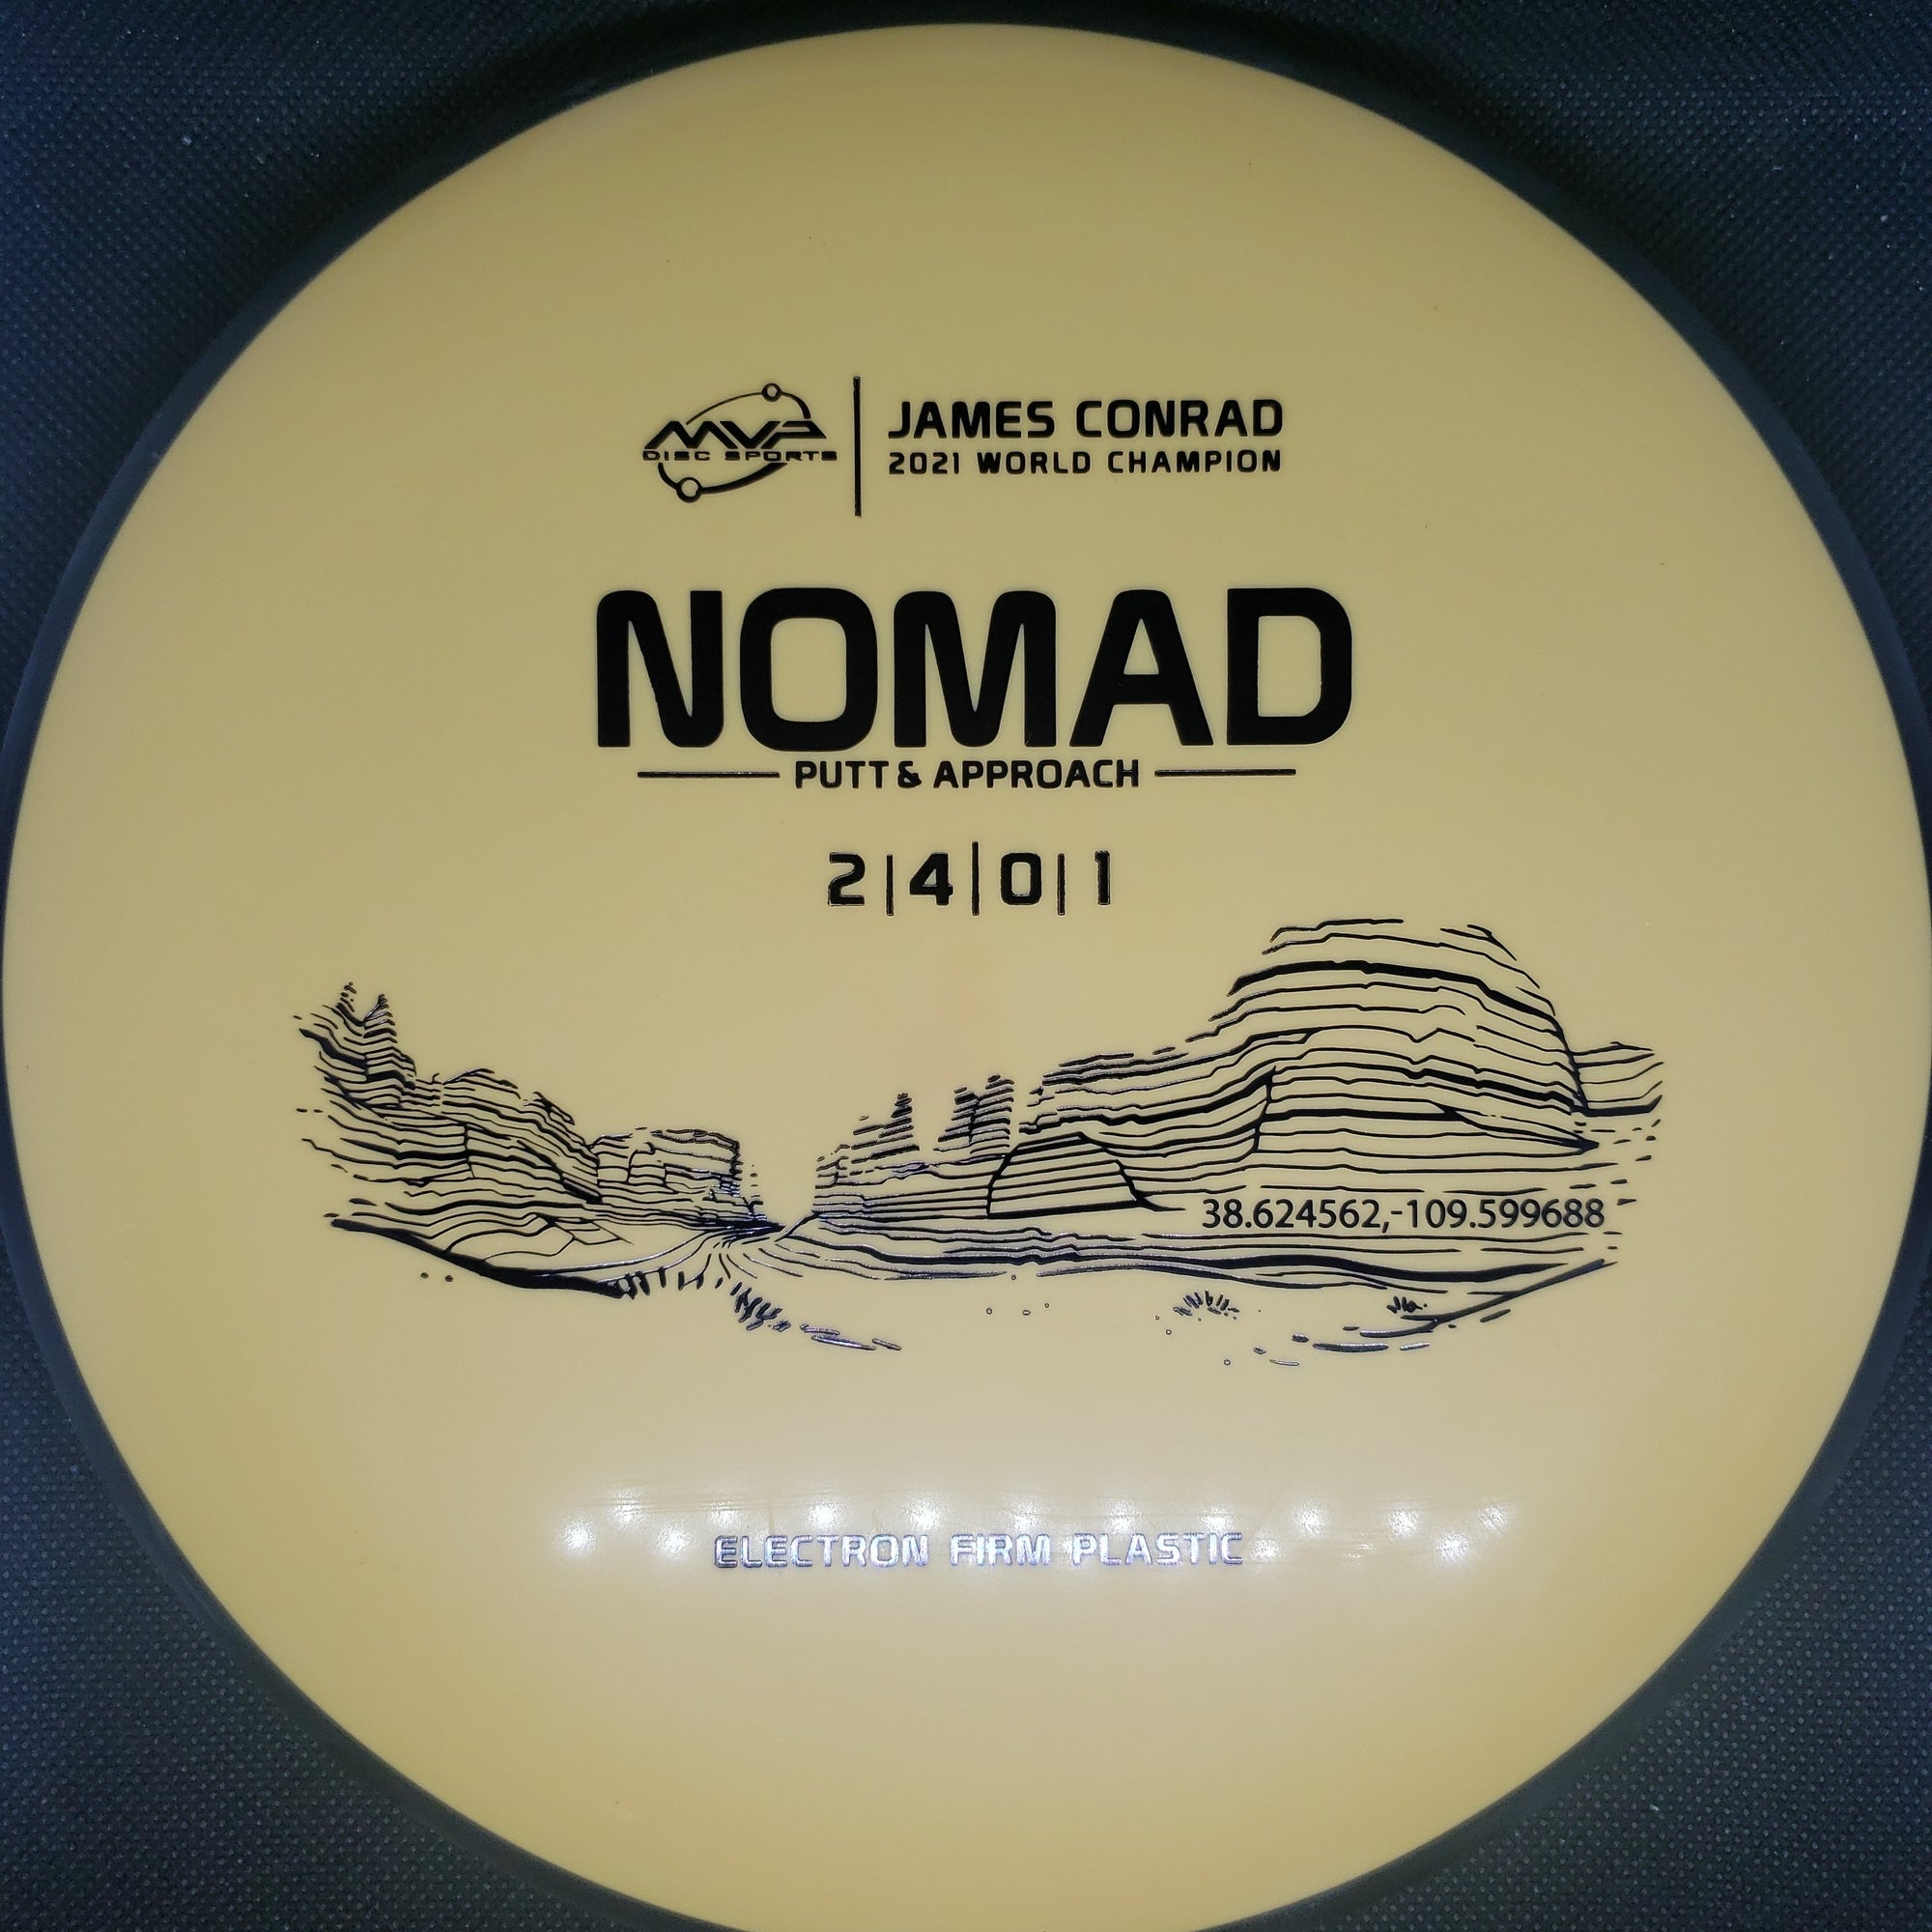 MVP Putter Nomad, Electron Firm